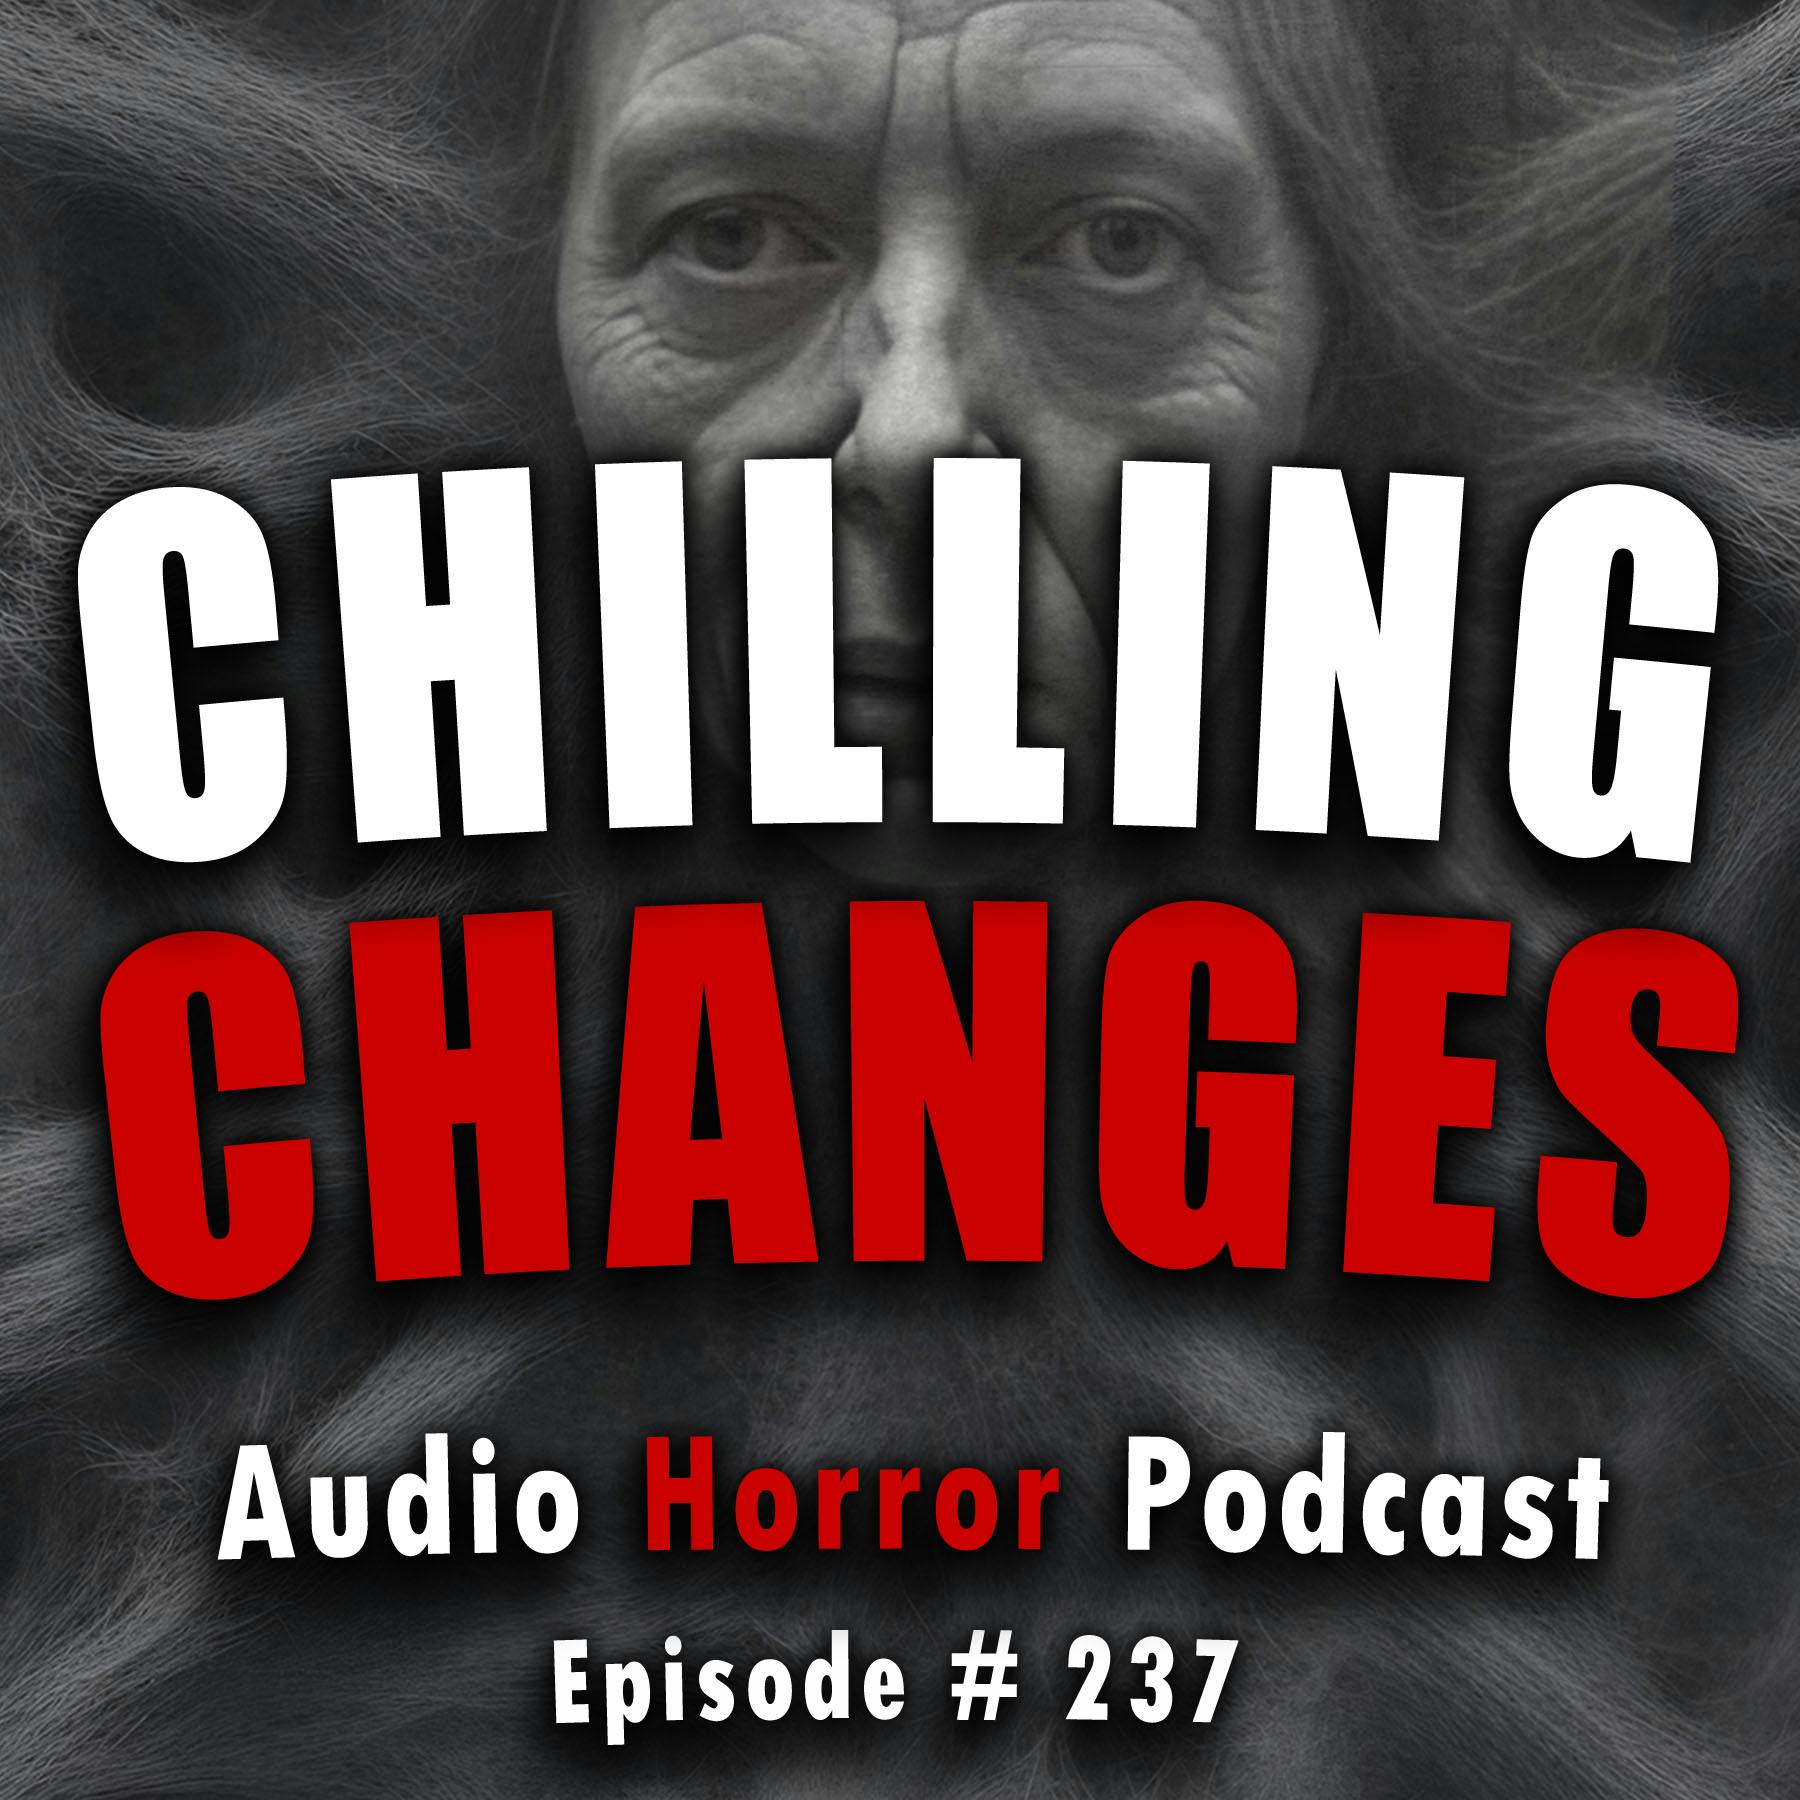 237: Chilling Changes - Chilling Tales for Dark Night